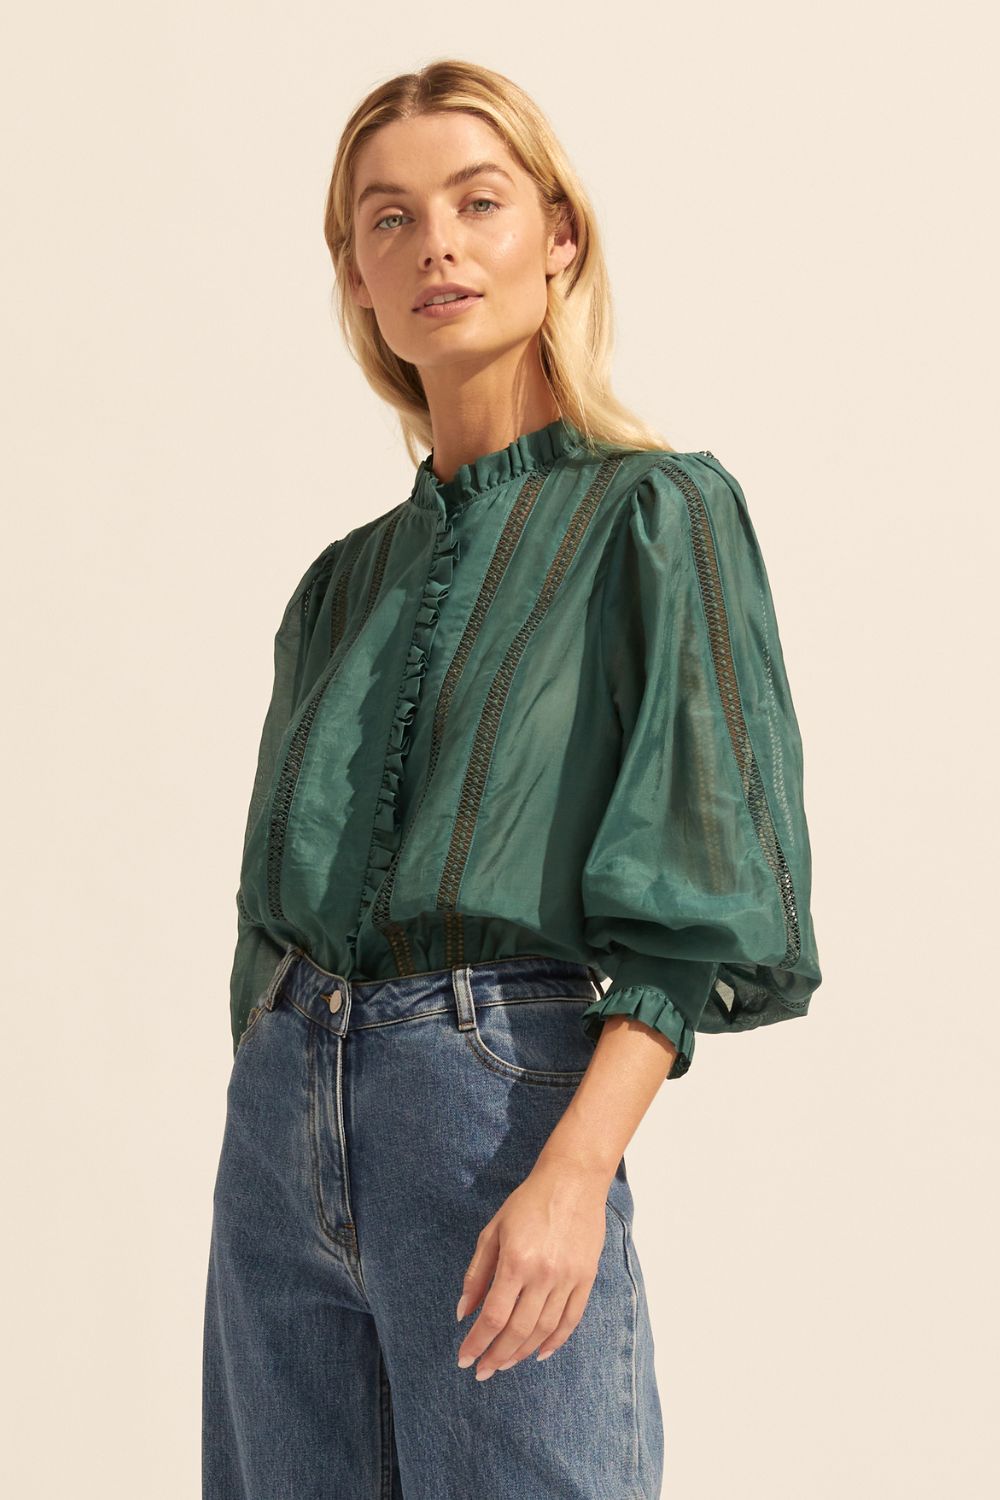 swoon top - green